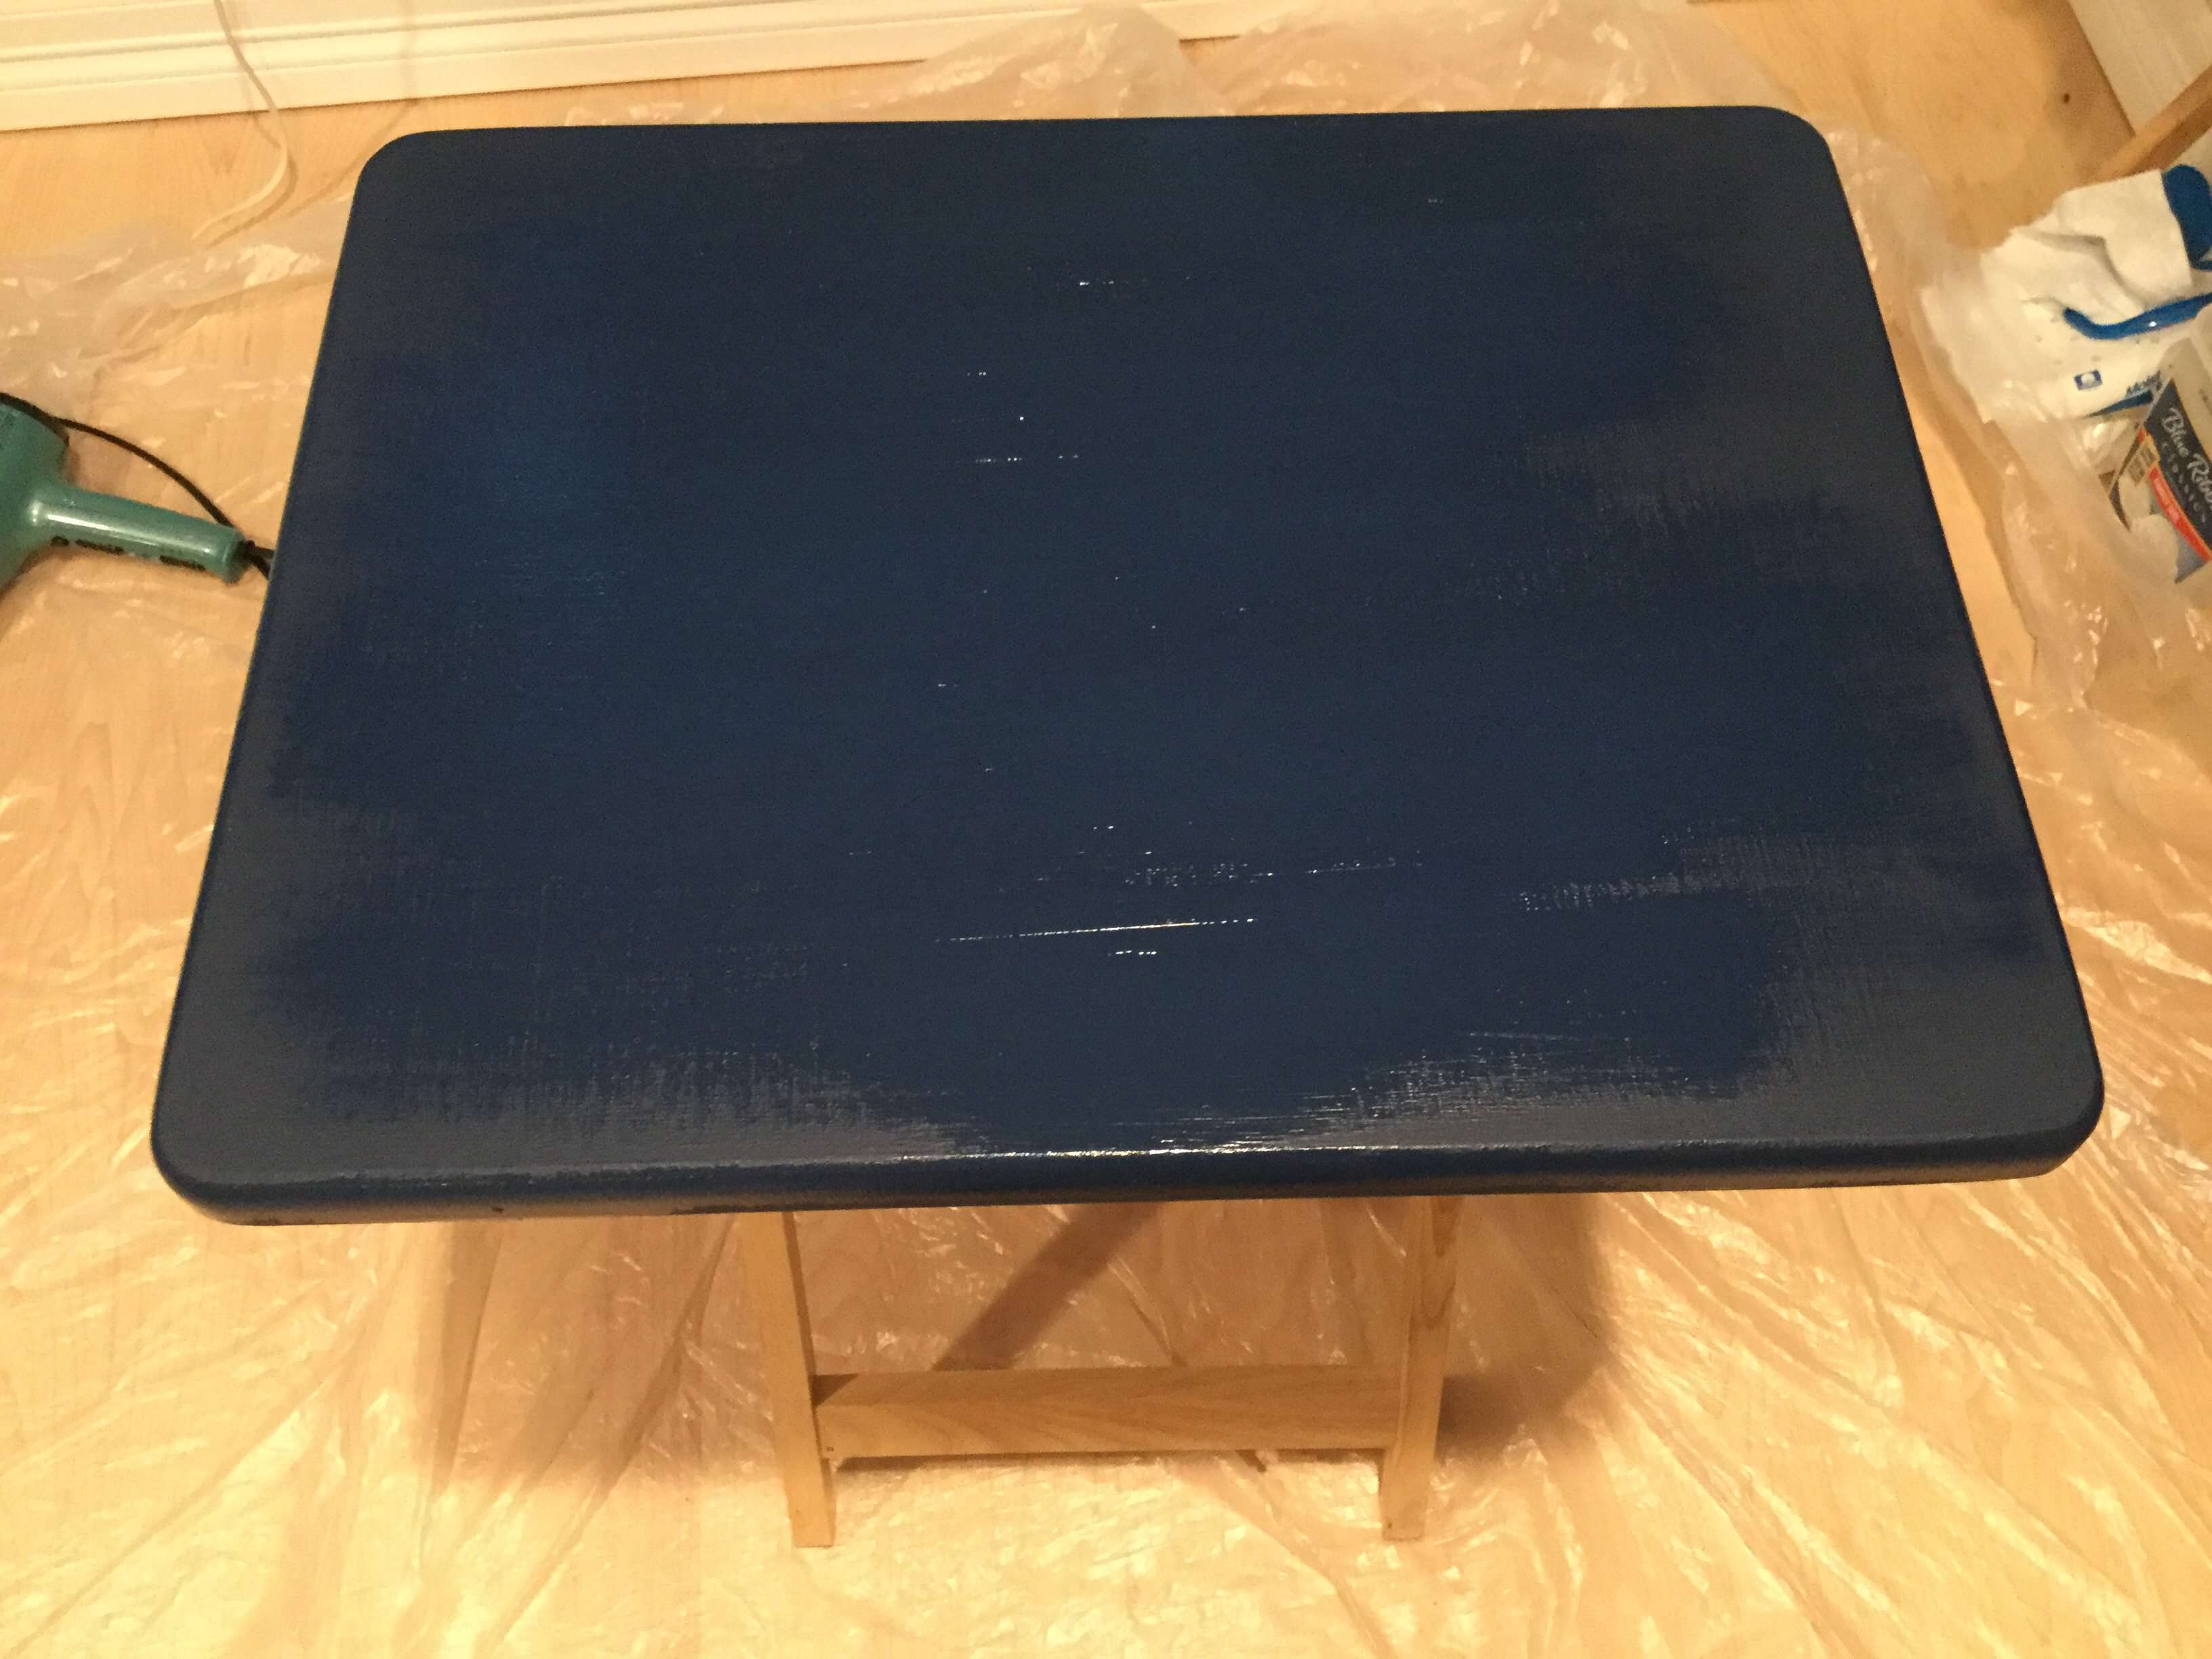 You're going to add 3 layers of Dixie Belle Paint and let it dry after each layer. I'll be using the Dixie Belle Bunker Hill Blue for this portion. You will put one coat on horizontal, the second coat you'll put on vertically, and the last coat you'll put on horizontally again. Let this dry completely.